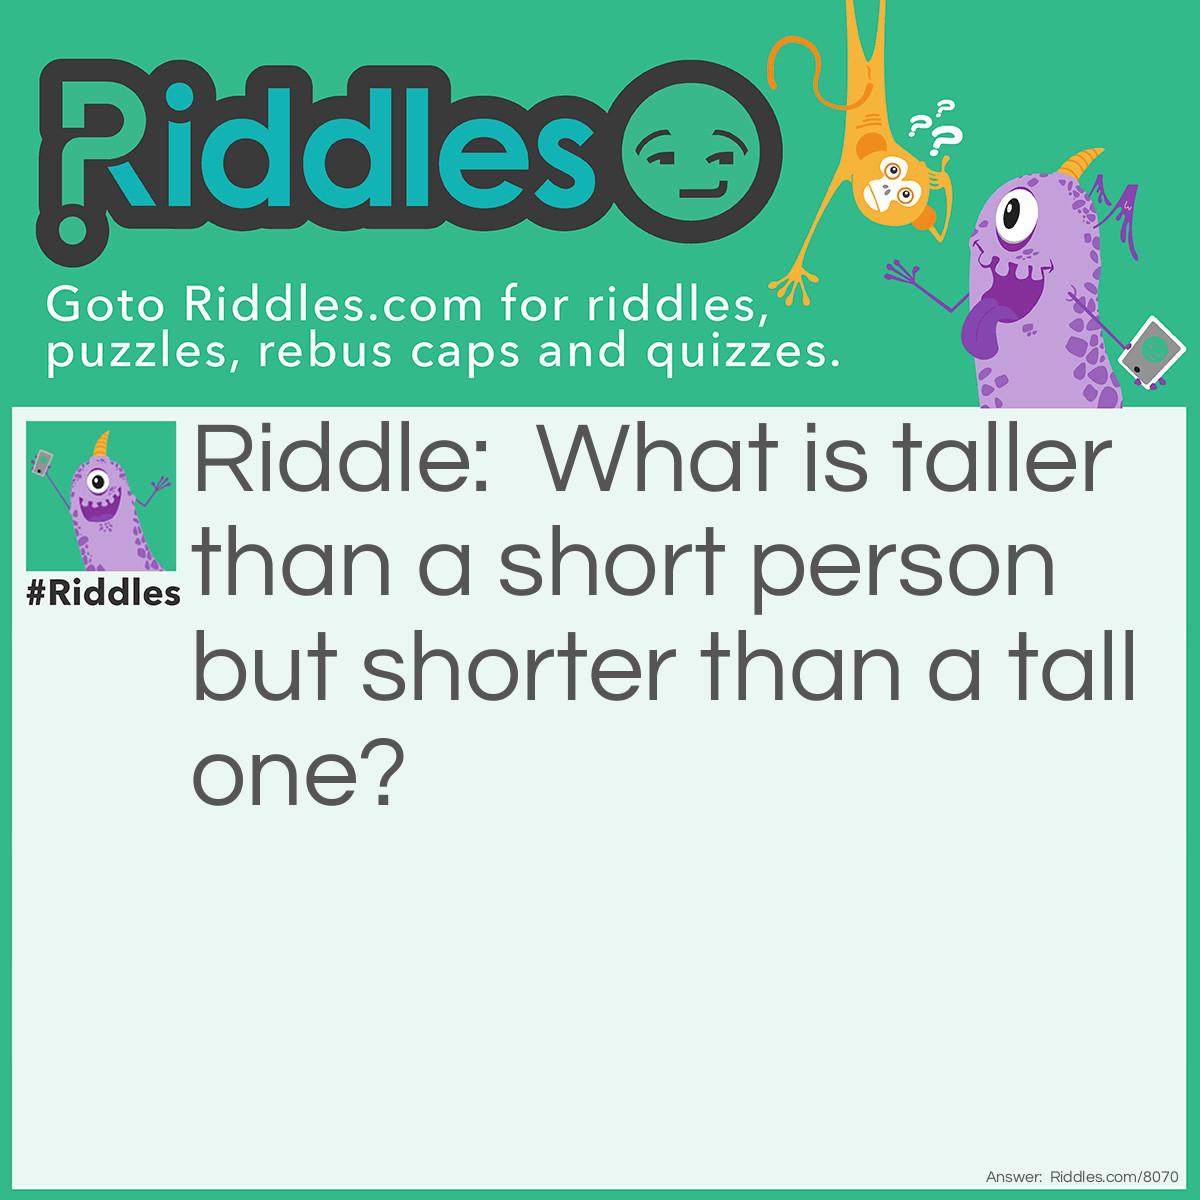 Riddle: What is taller than a short person but shorter than a tall one? Answer: A short person on a chair.